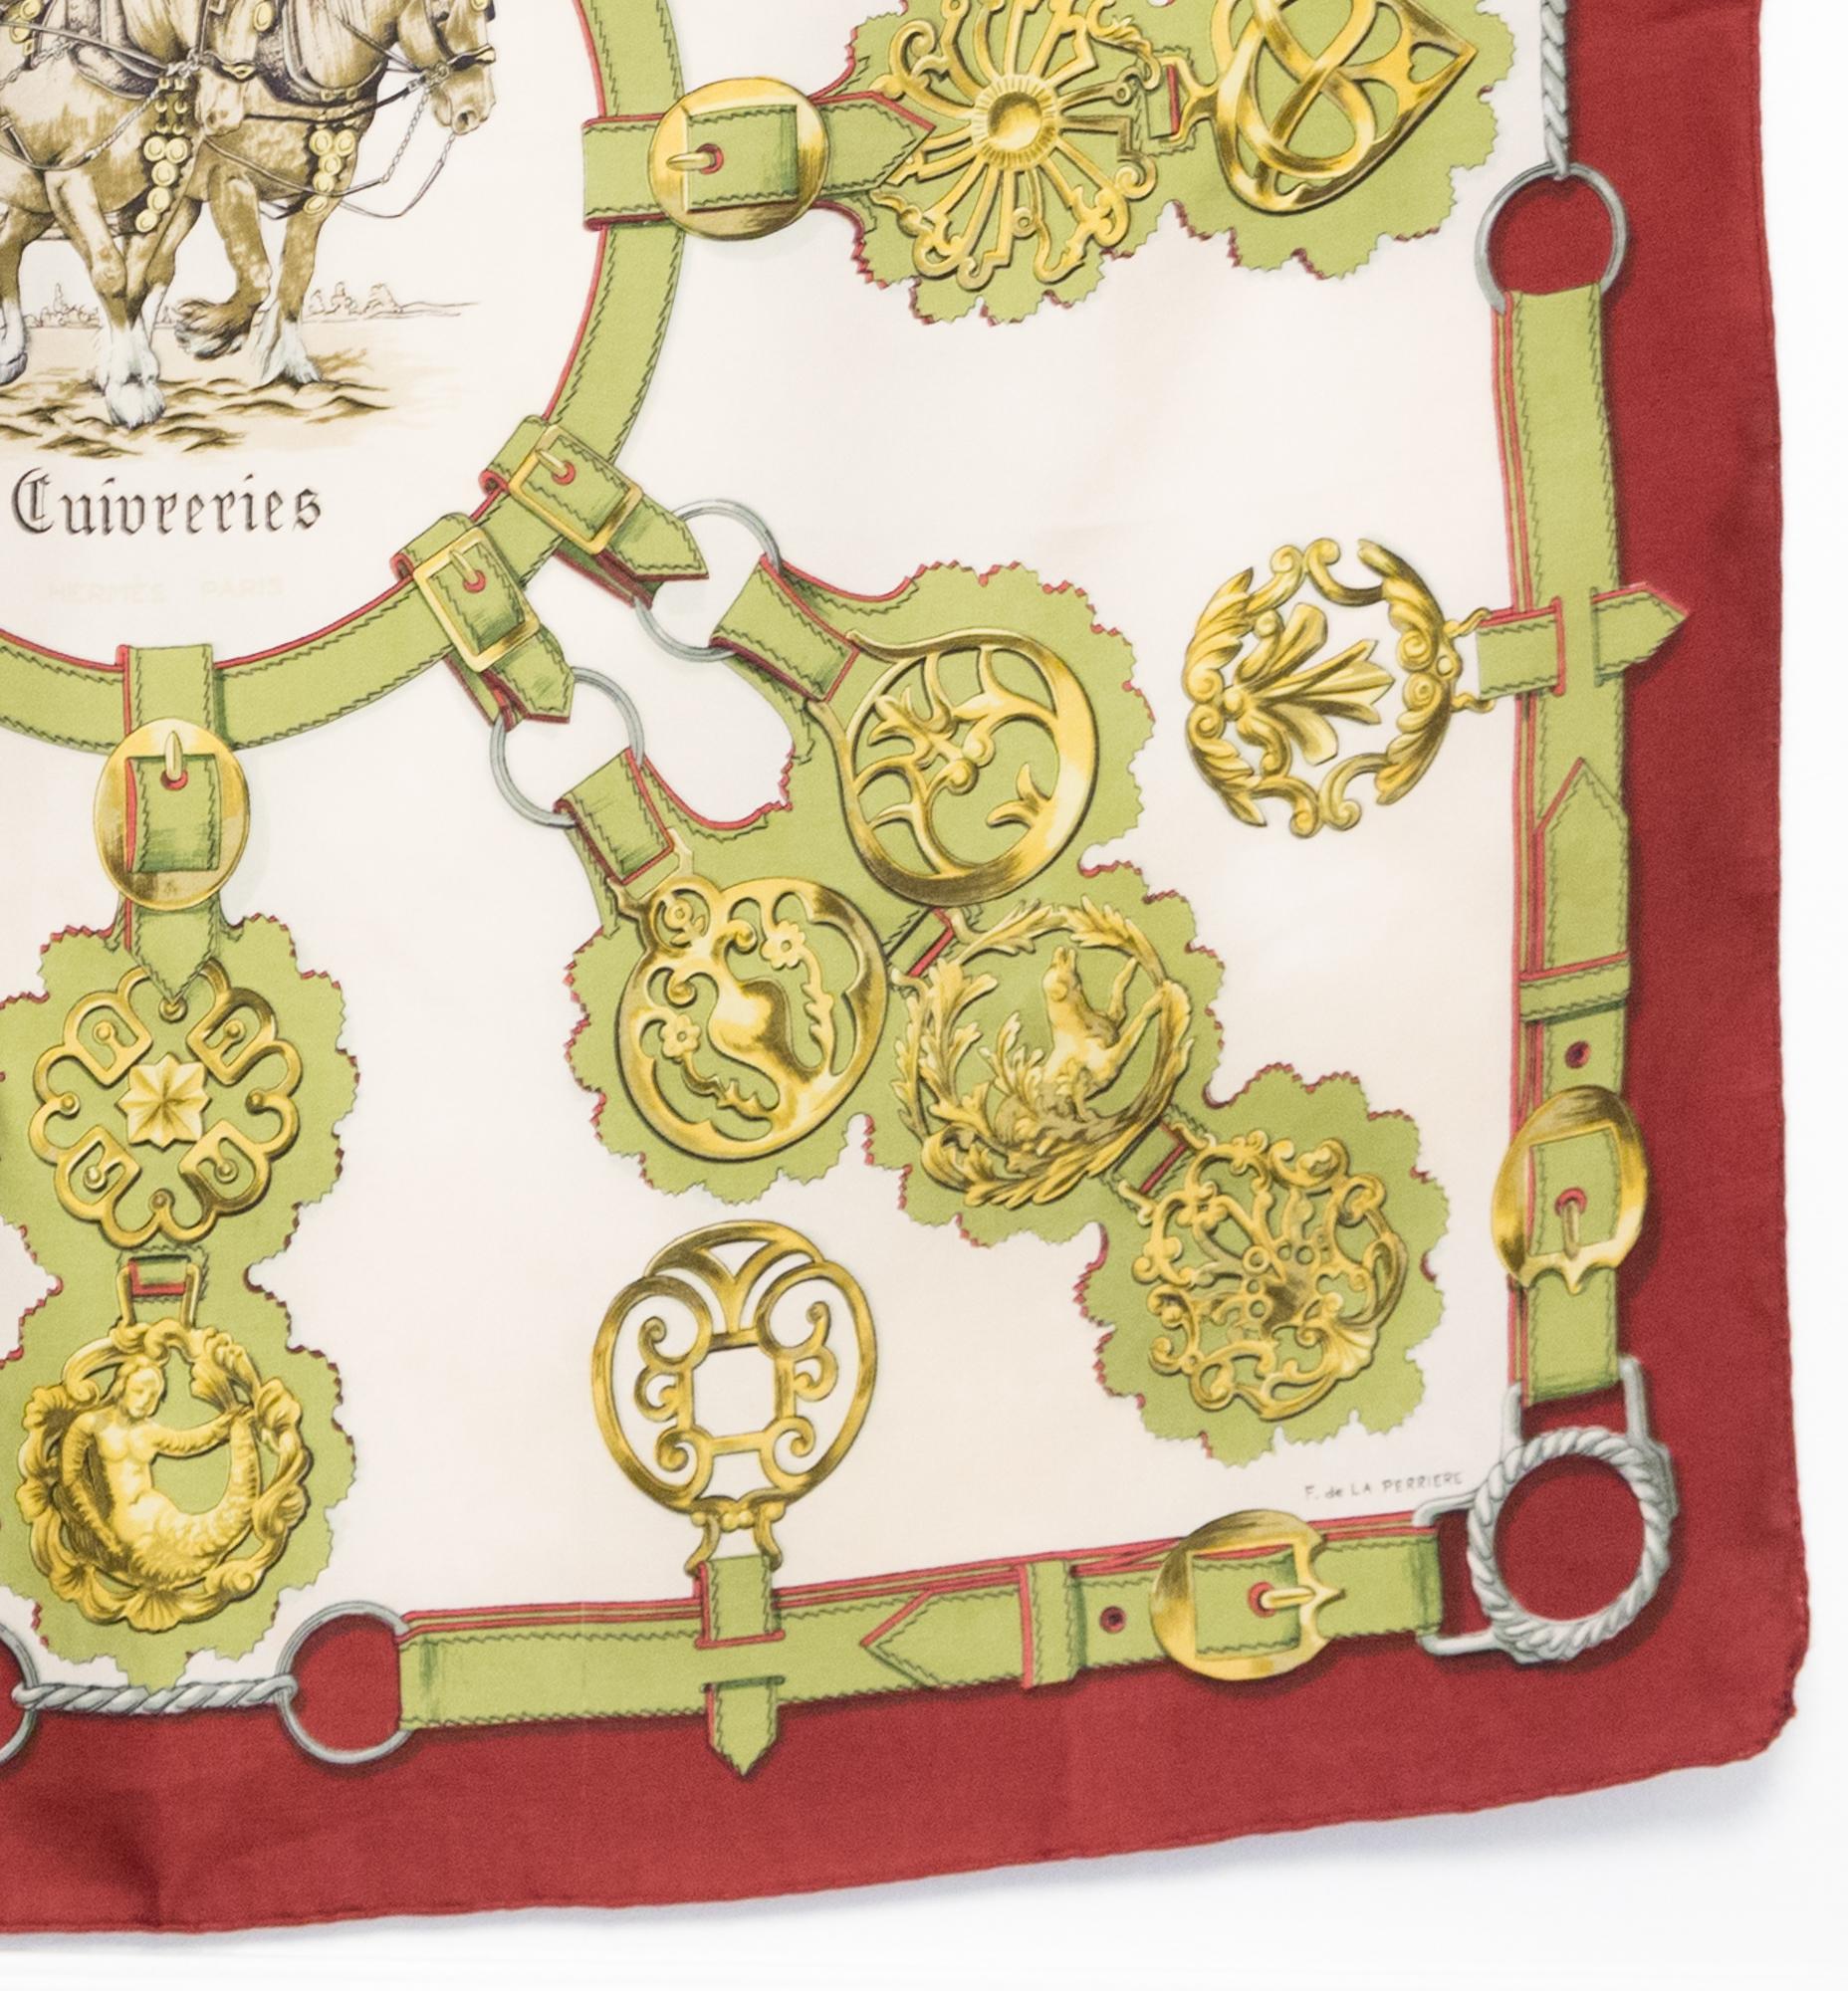  Hermes Cuivreries by F.de la Perriere Silk Scarf In Good Condition For Sale In Paris, FR